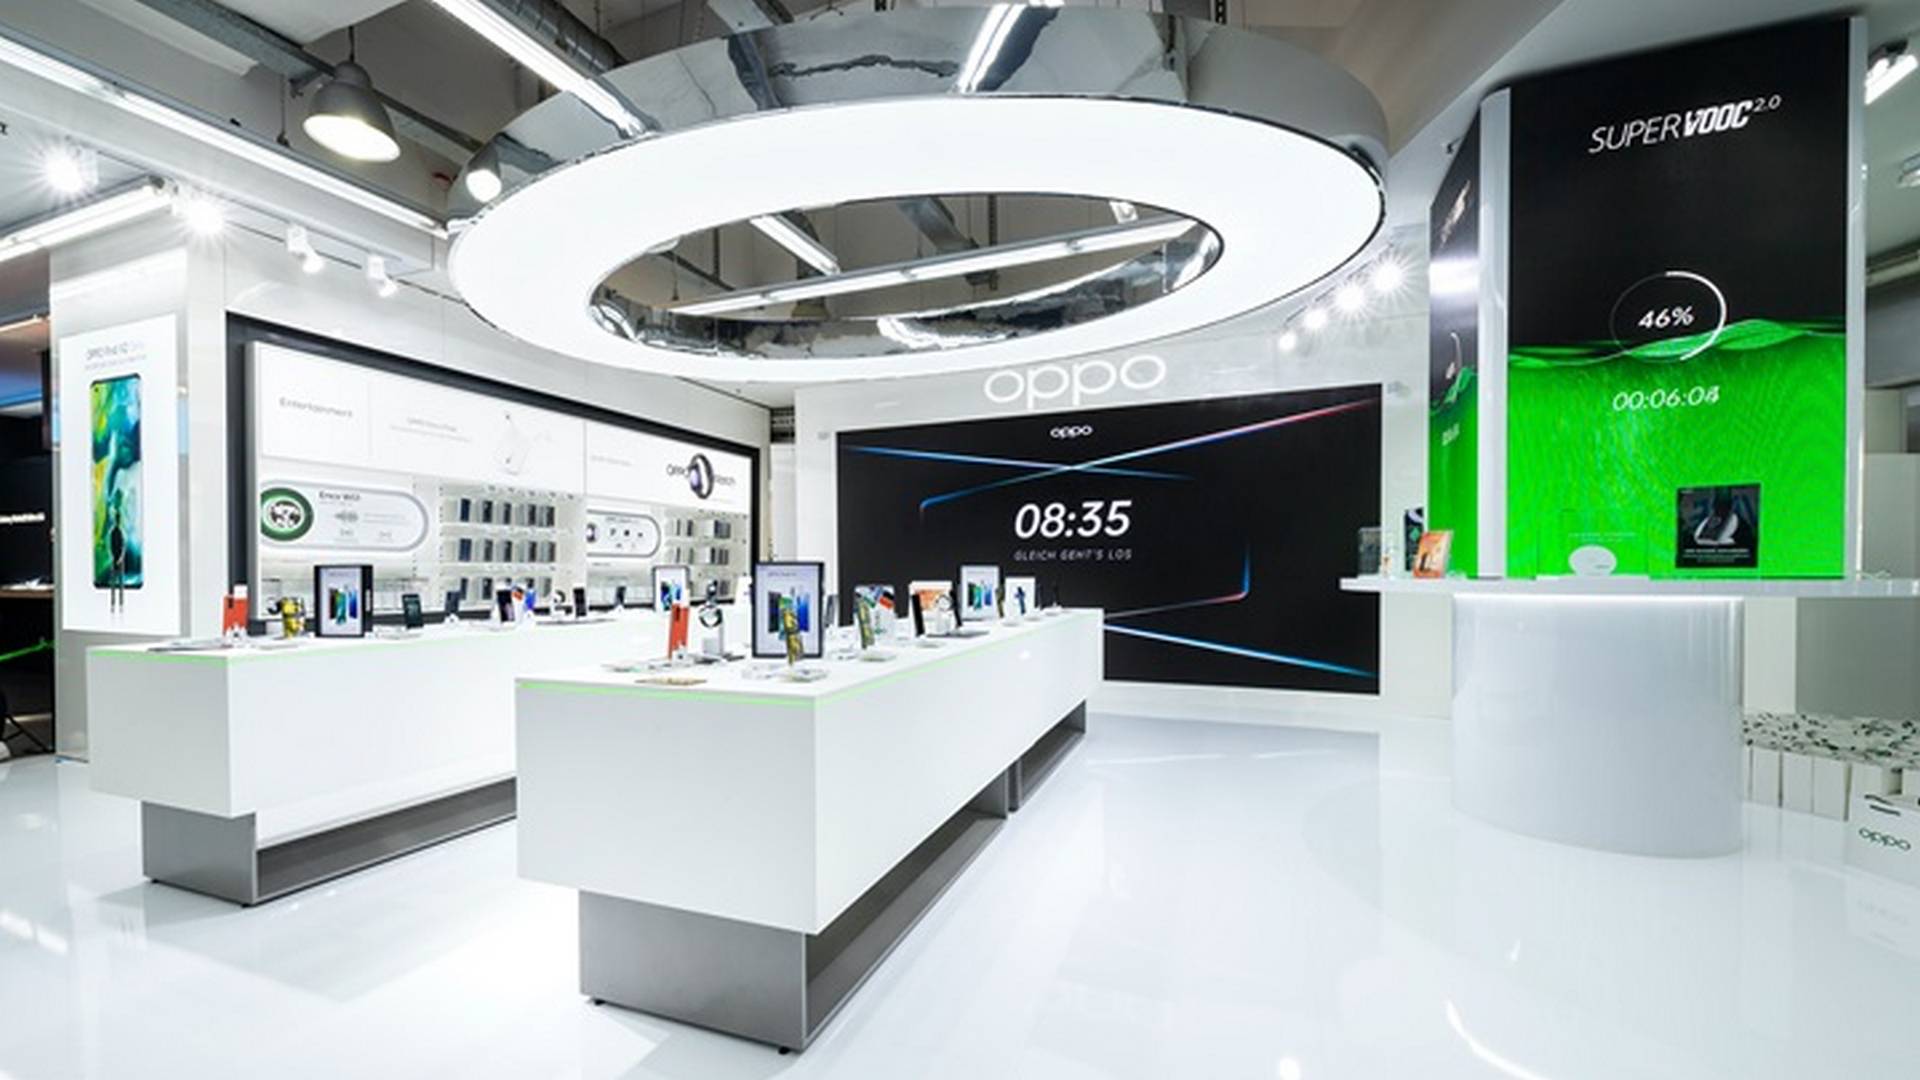 OPPO opens its first flagship store in Europe in Germany - GizChina.it